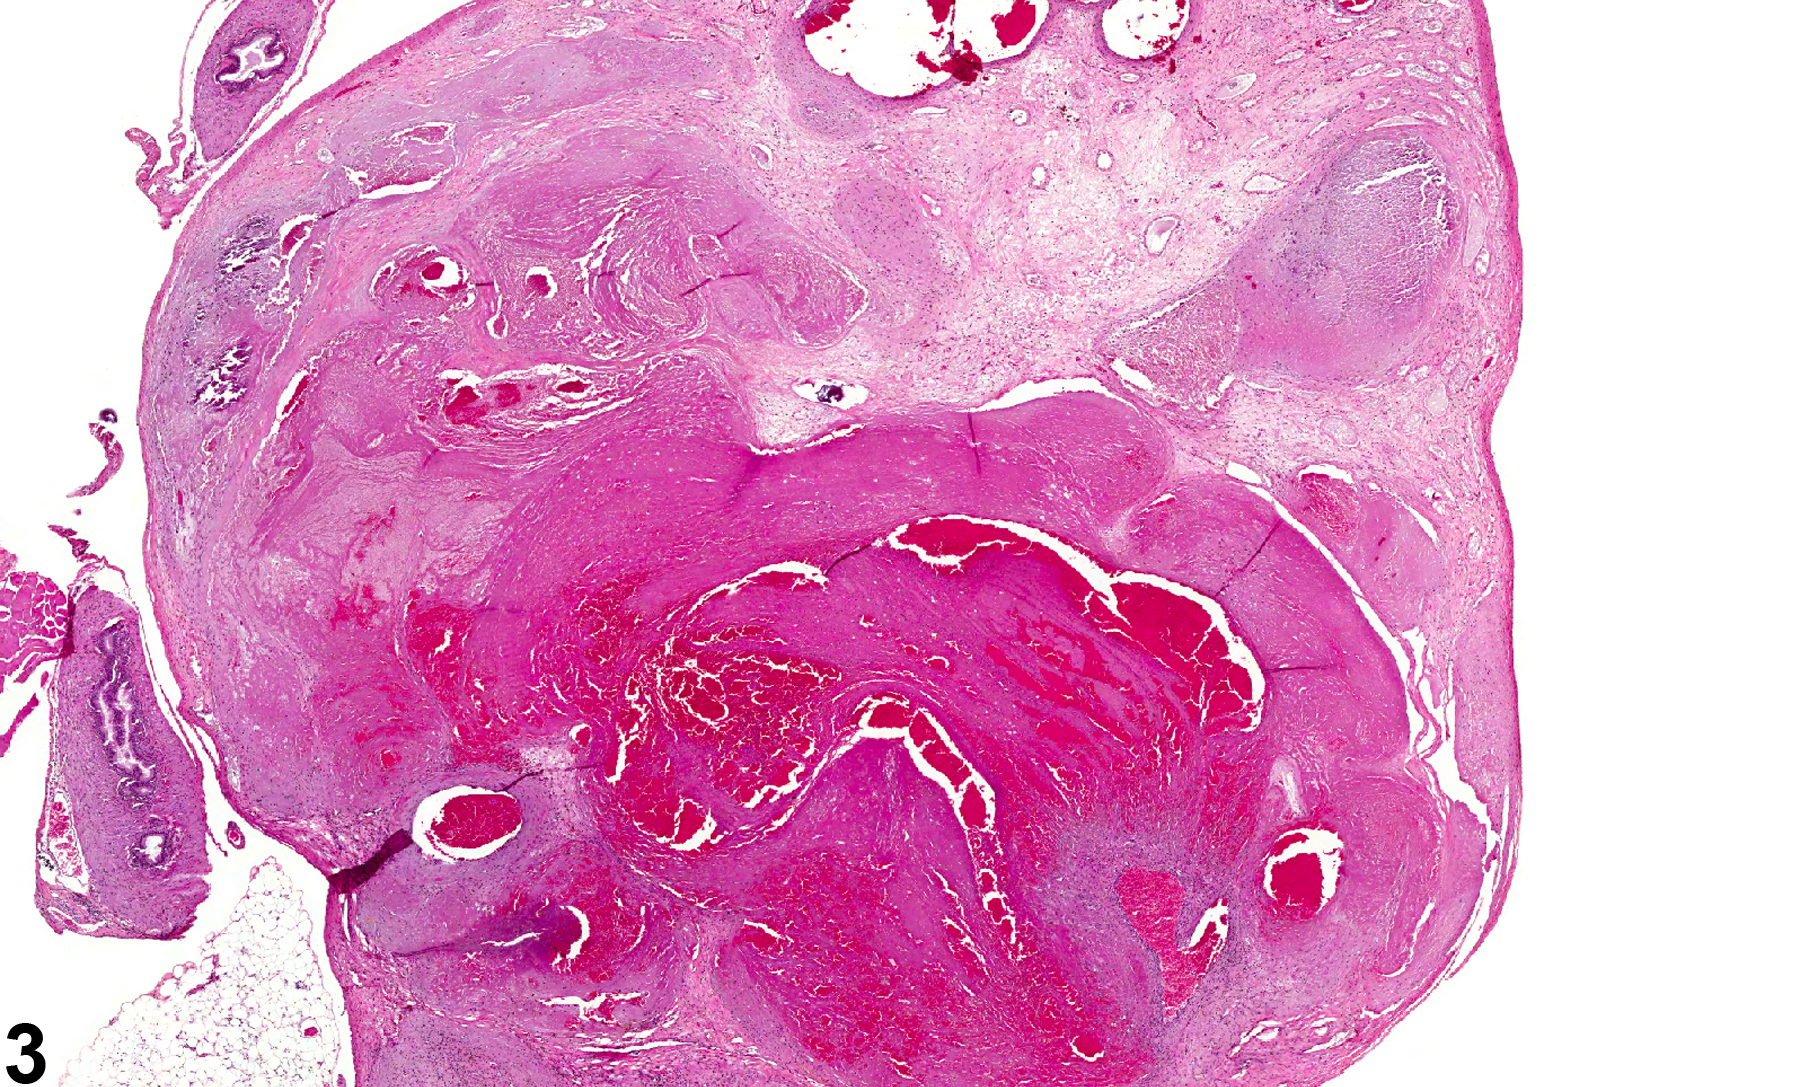 Image of seminiferous tubule necrosis in the testis from a male B6C3F1 mouse in a chronic study